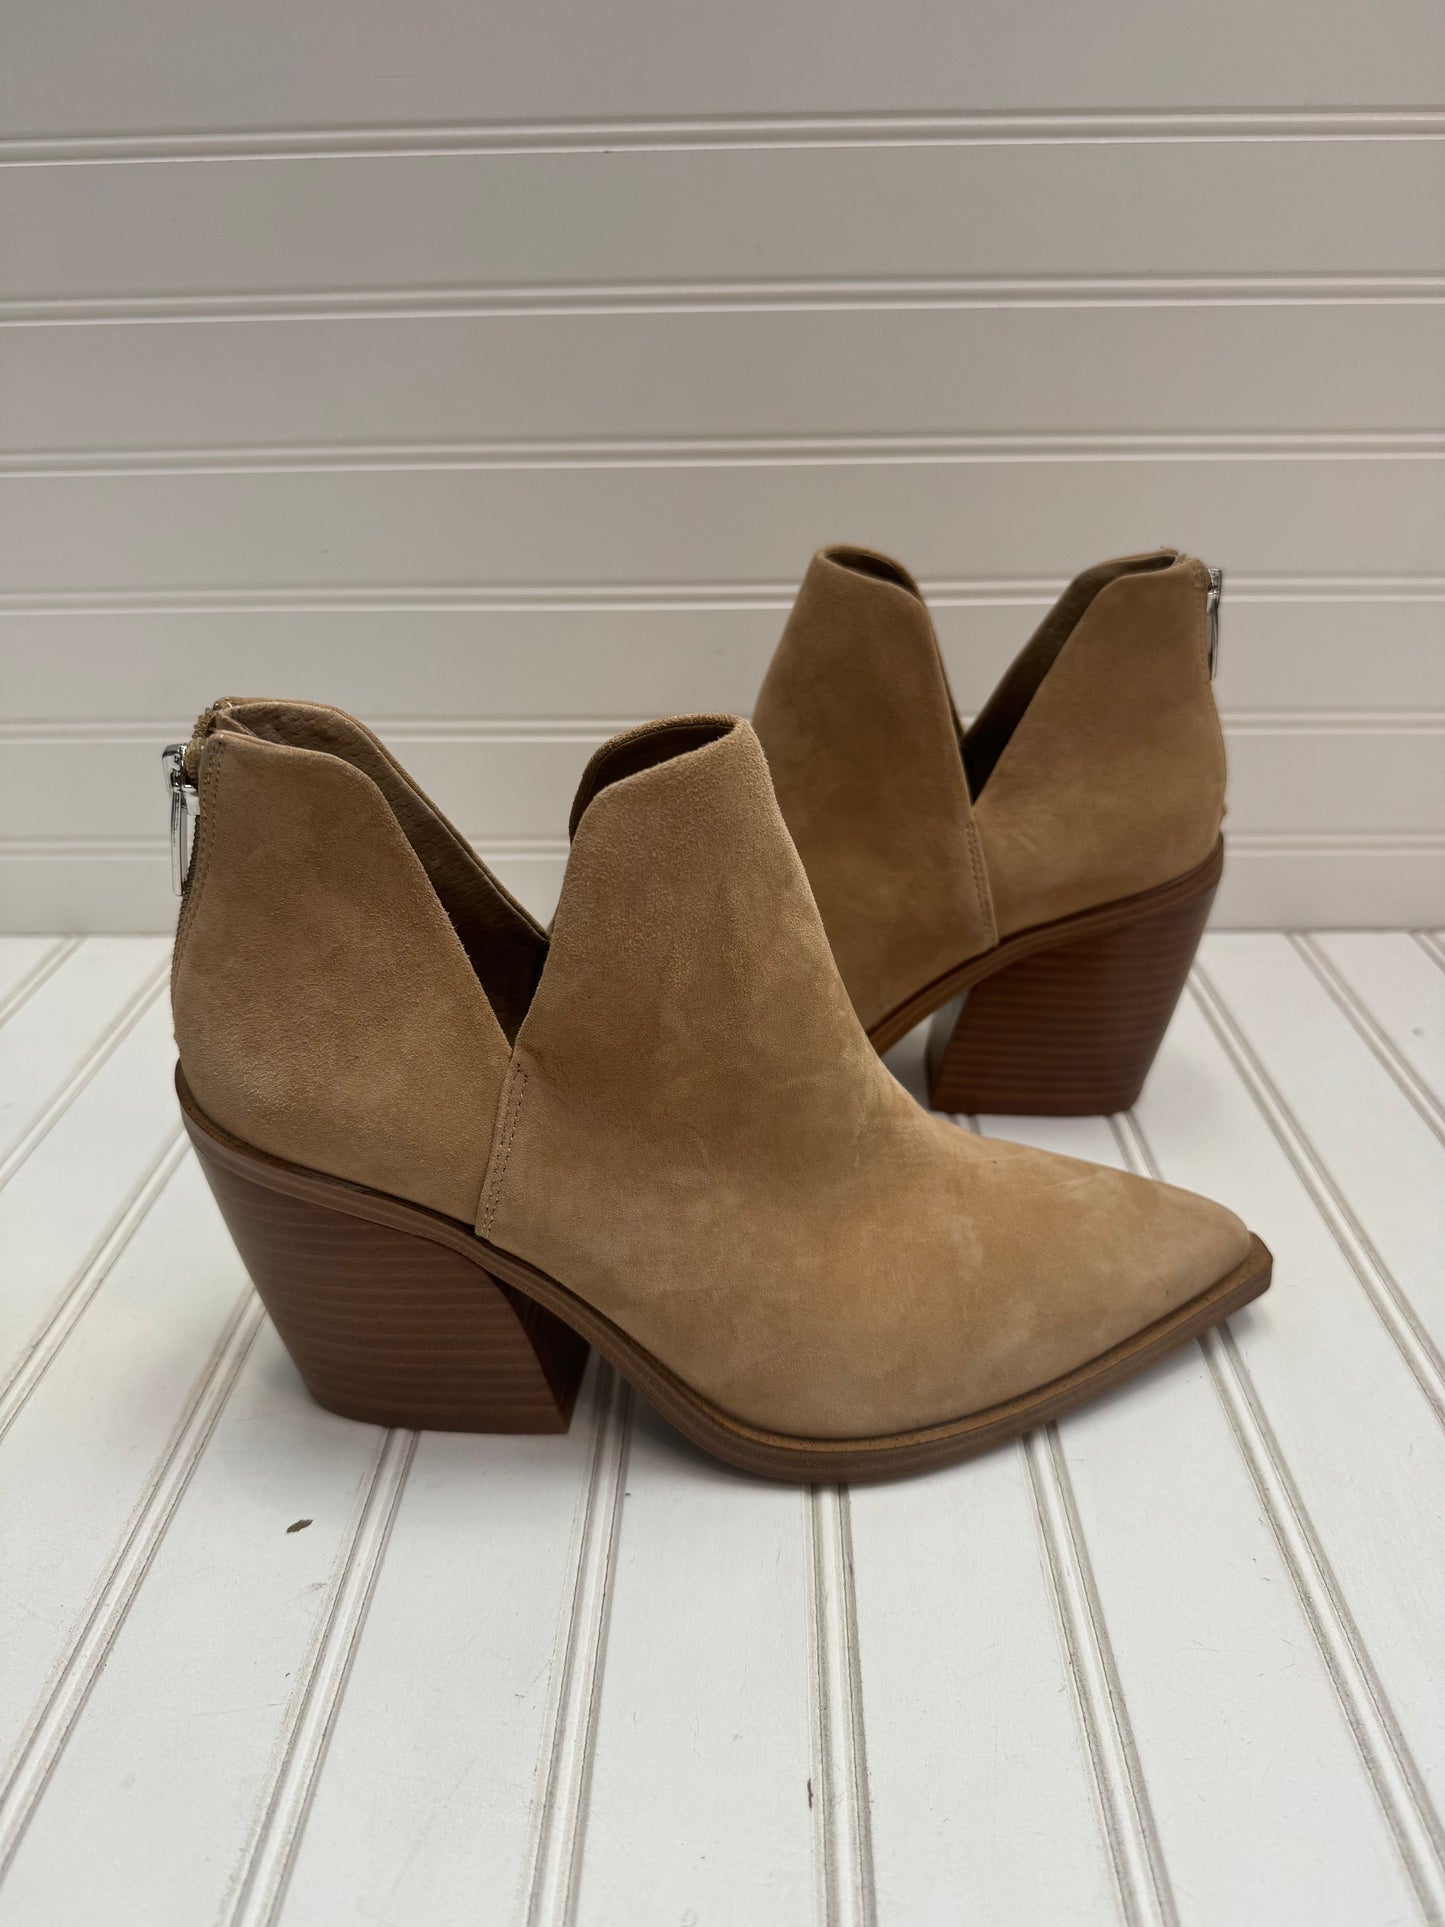 Tan Boots Ankle Heels Vince Camuto, Size 8.5